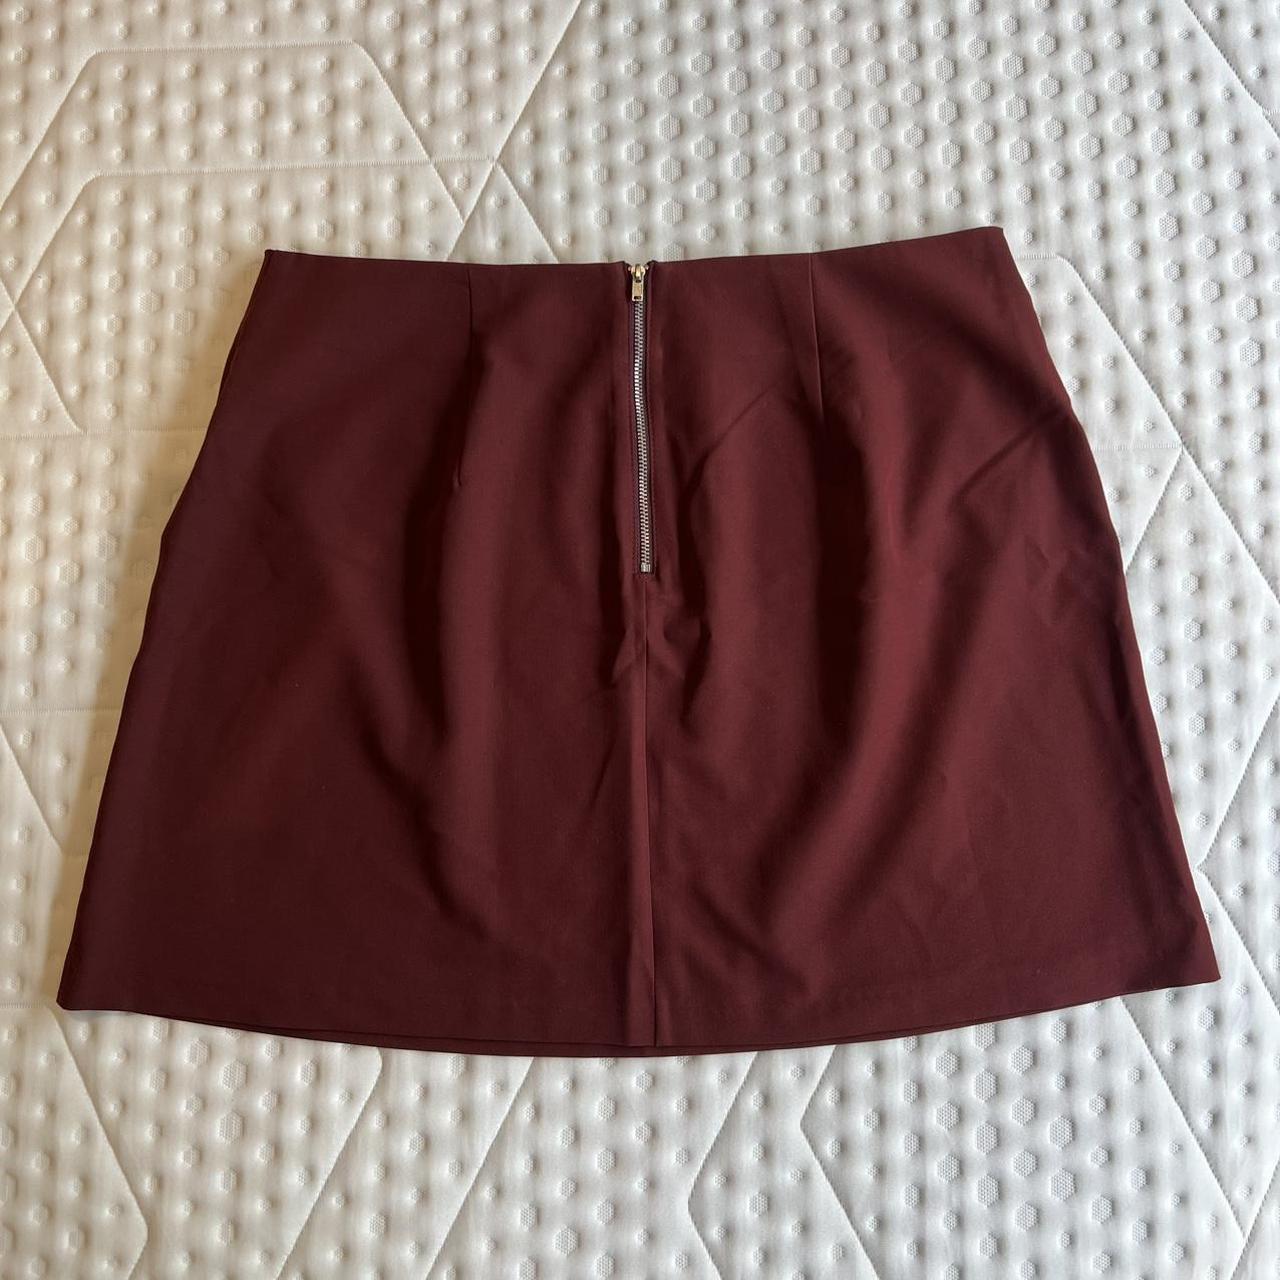 Asos mini skirt Never worn New without tags Size... - Depop